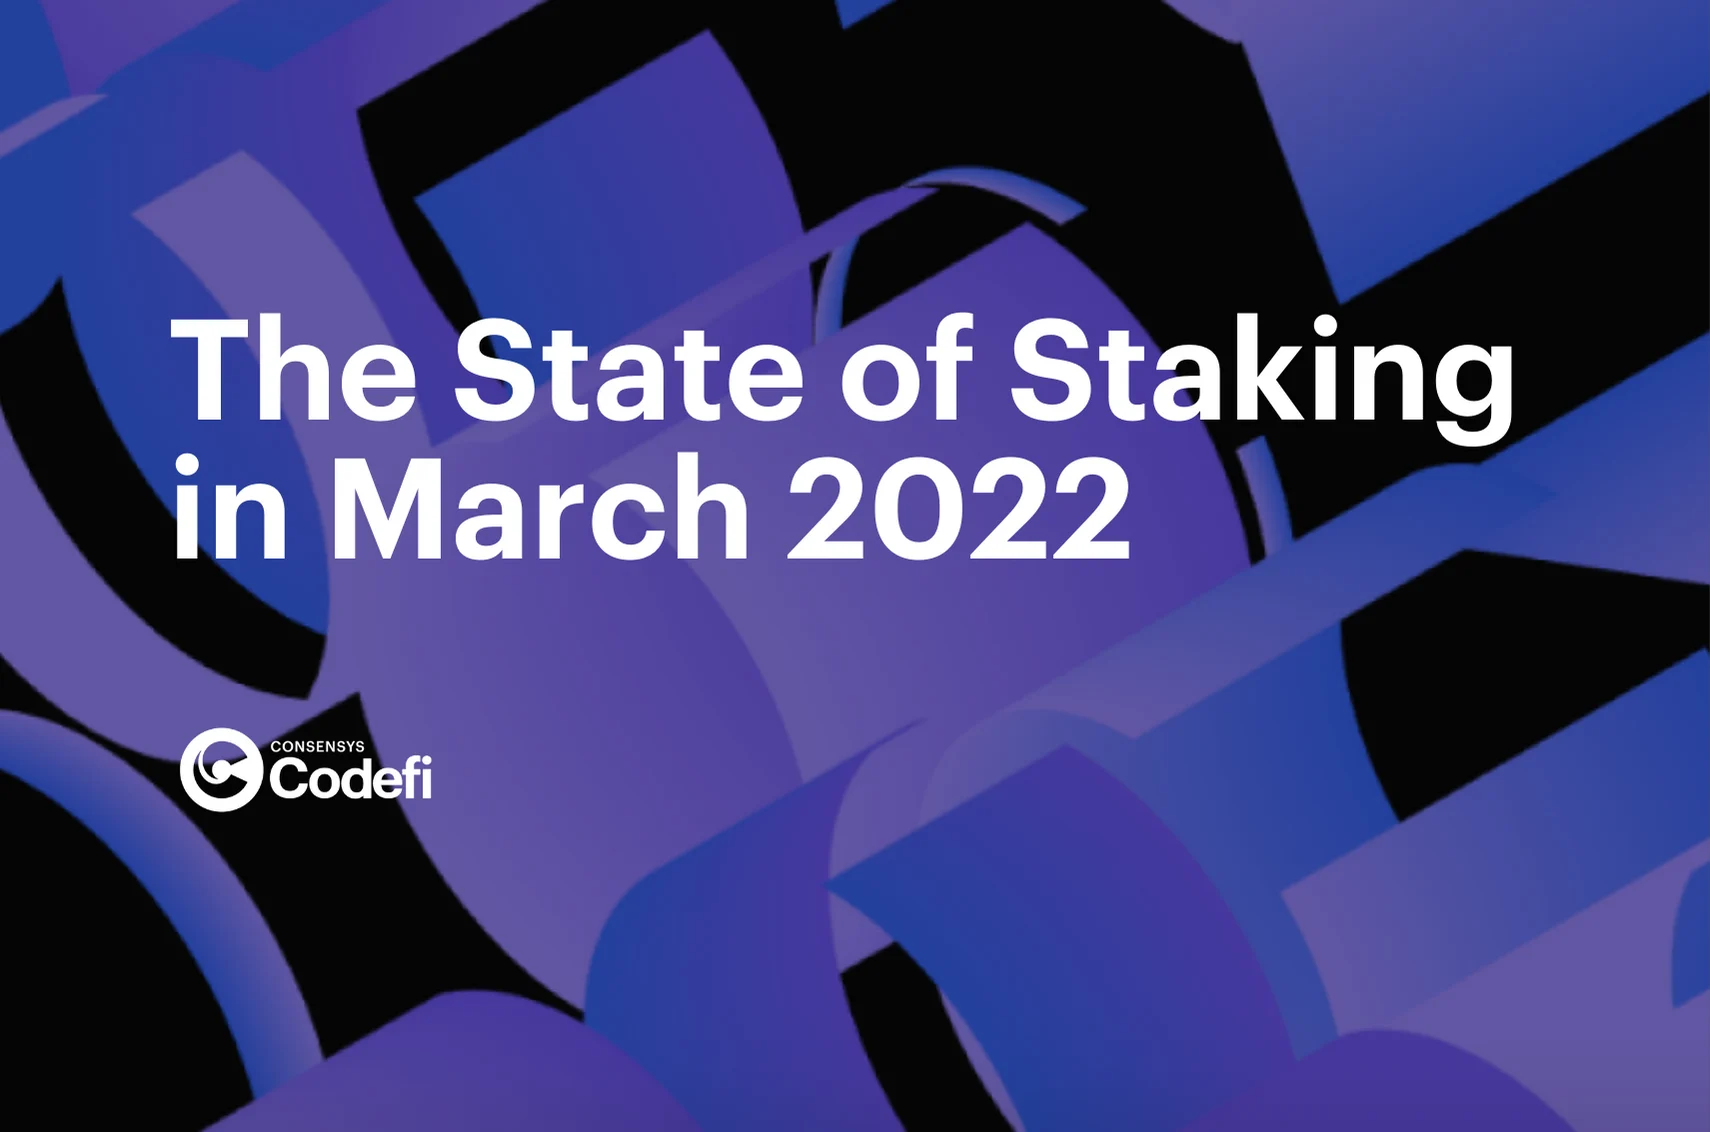 Image: The State of Staking in March 2022